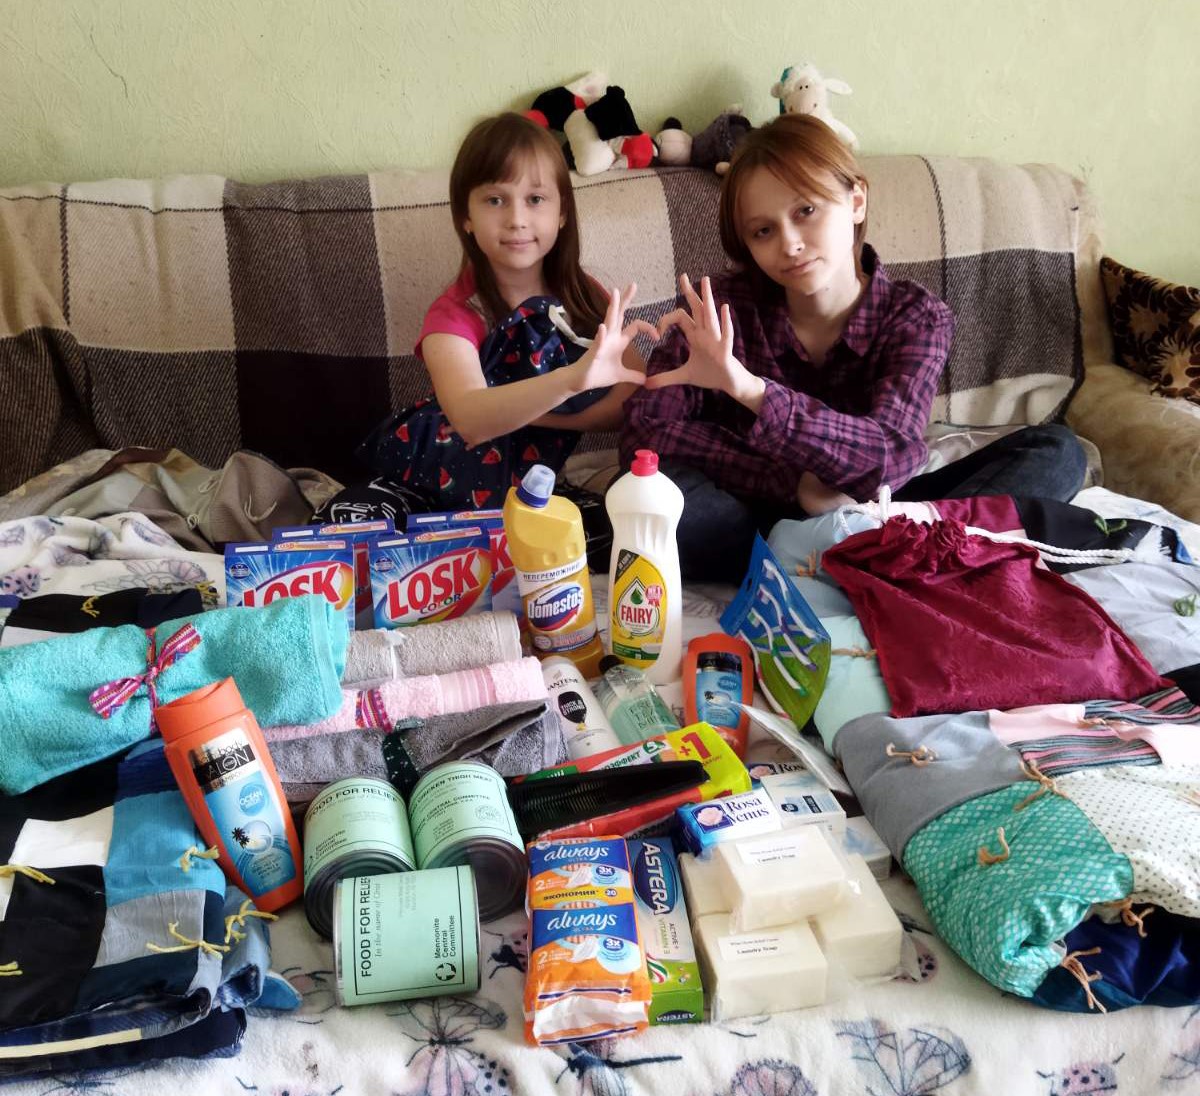 Two girls making a heart symbol with their hands sitting in front of relief supplies on a bed